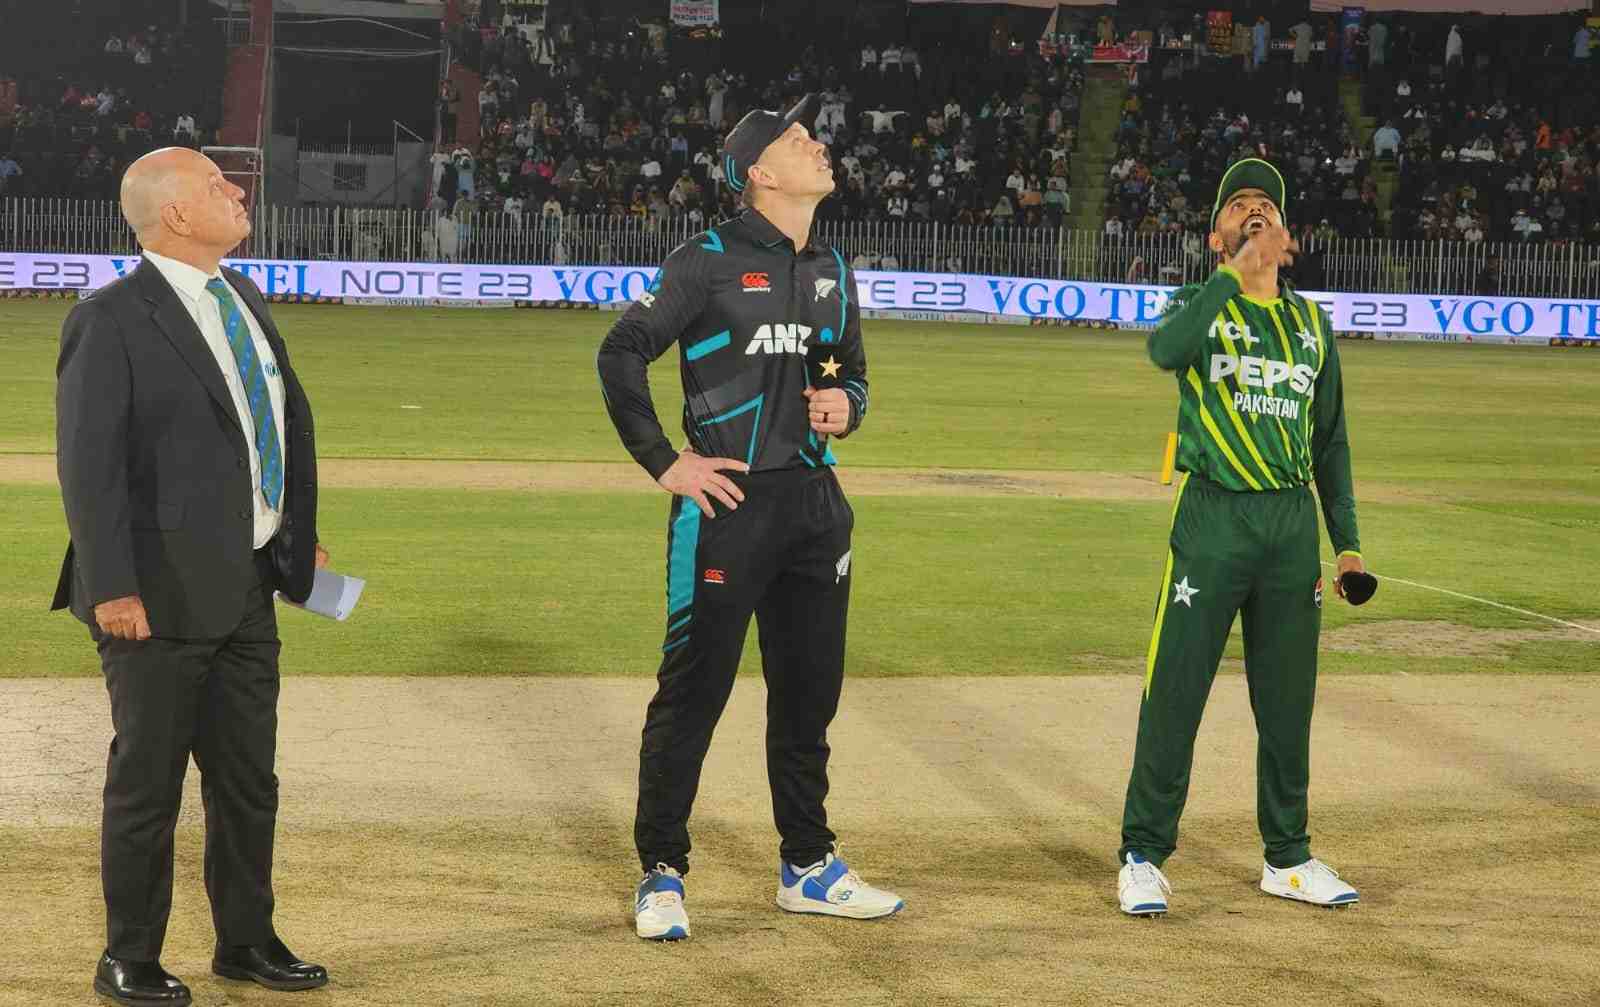 Live from Pindi T20: Pakistan win the toss and elect to bowl first